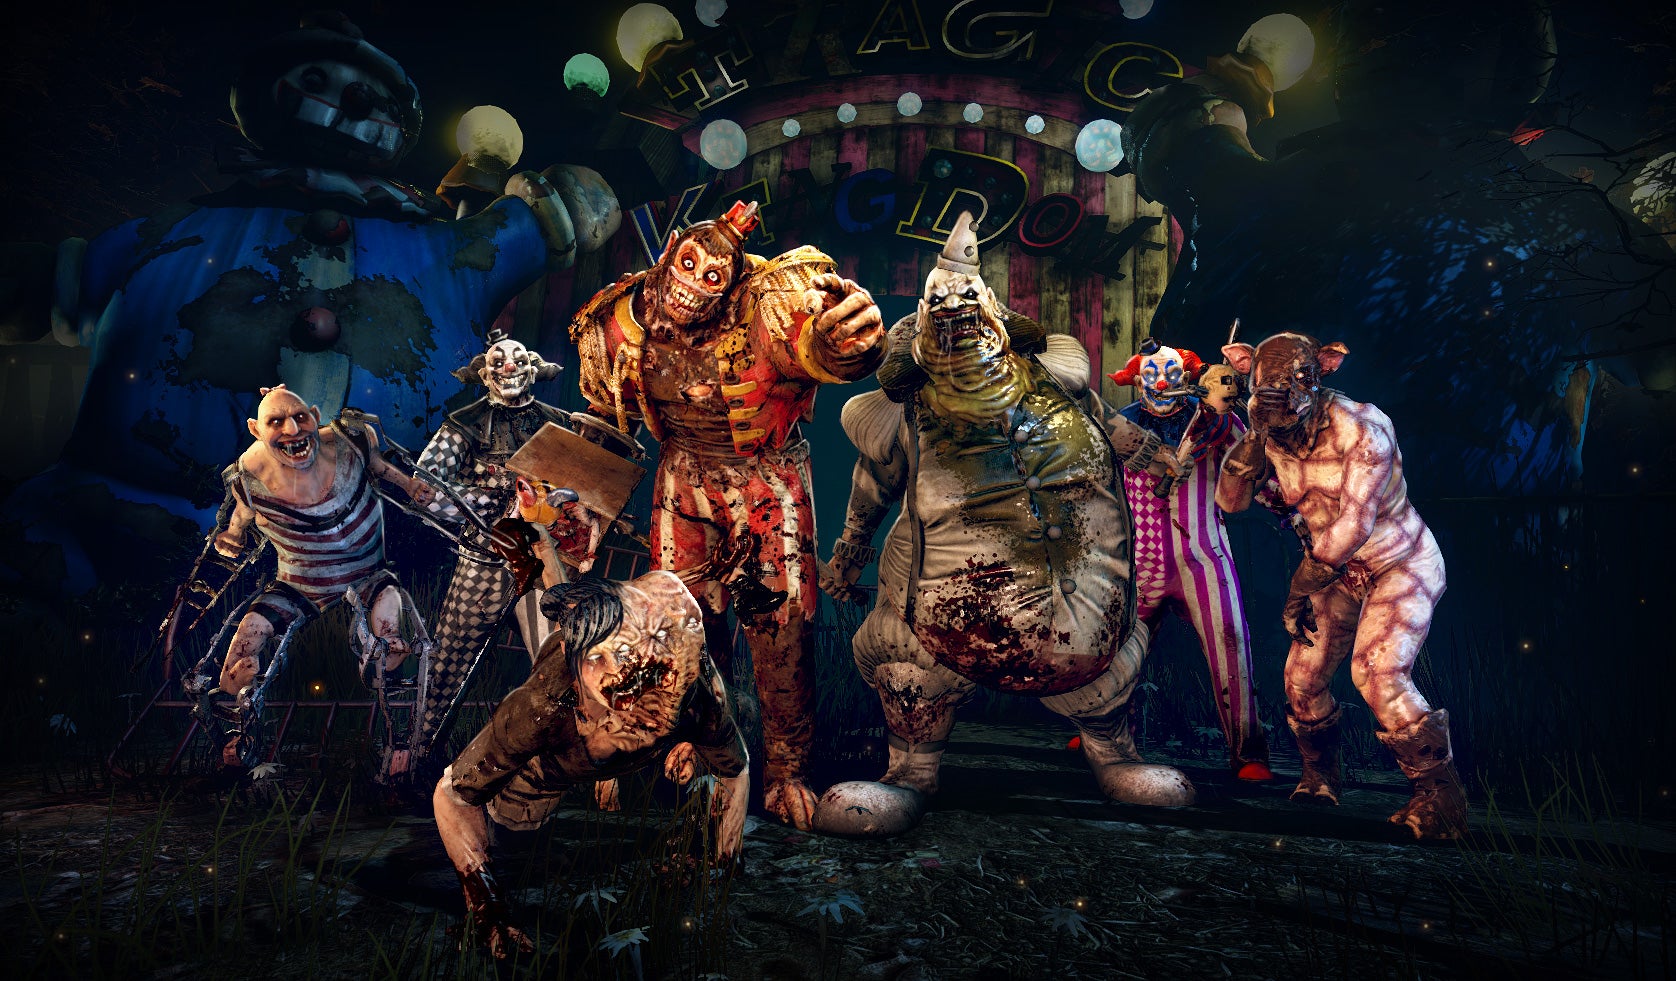 Image for Killing Floor 2's epic yet gross "Summer Sideshow" event begins tomorrow